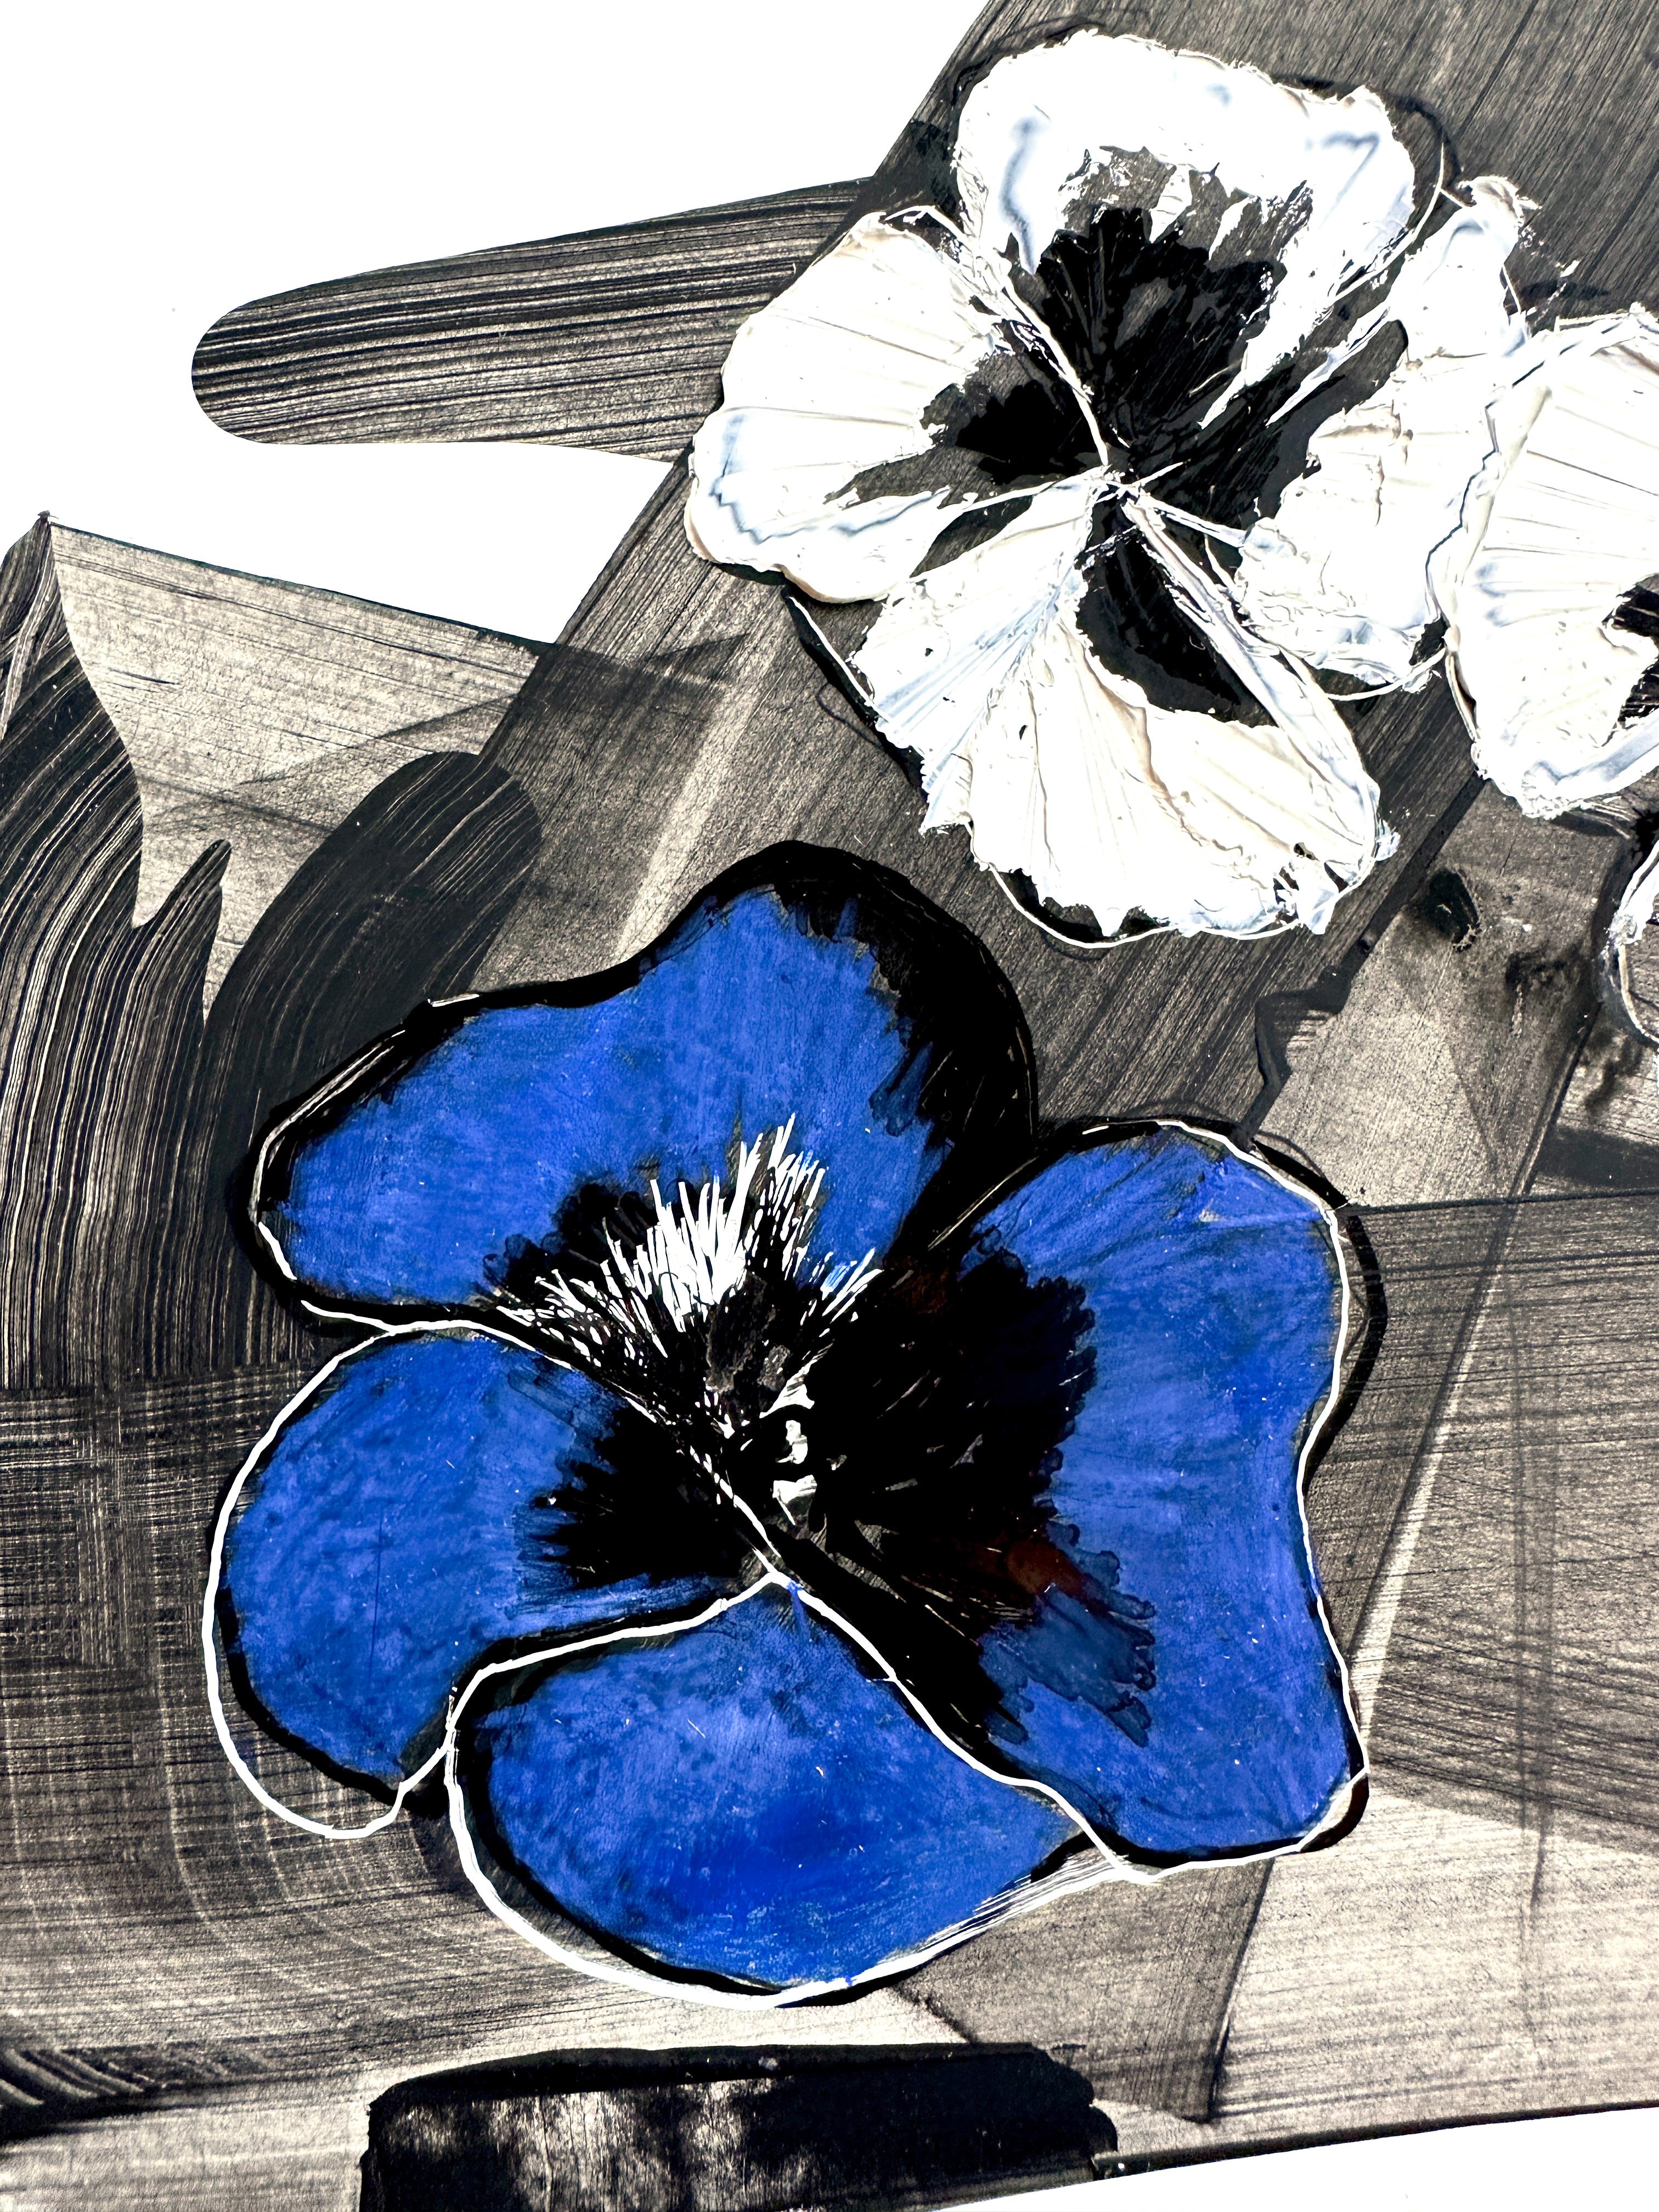 Abstract flowers Pensée, oil painting Pensée, flowers Pensée, blue Pensée. - Black Still-Life Painting by KOKO HOVAGUIMIAN